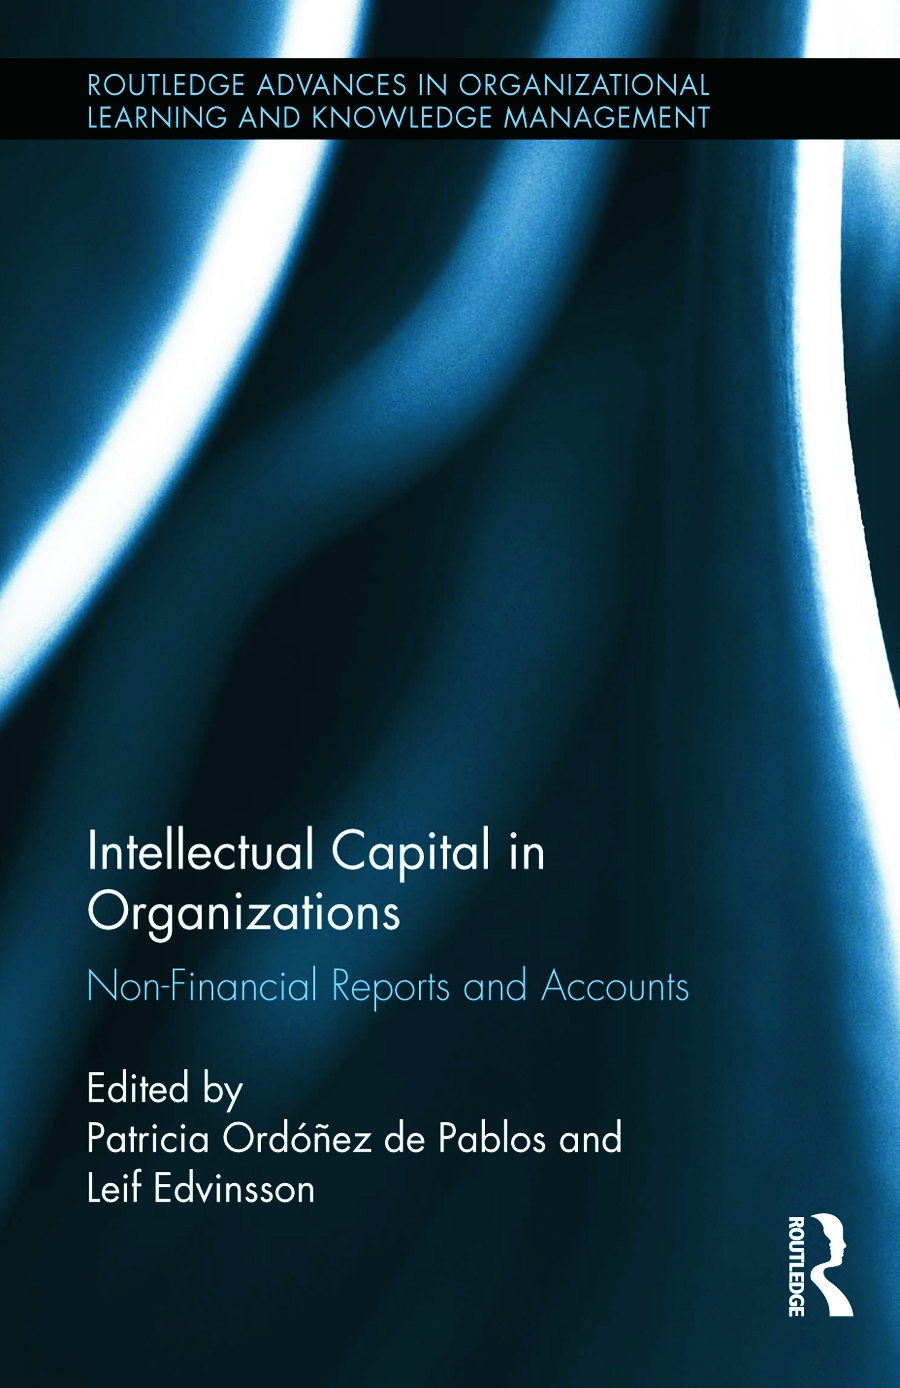 Intellectual Capital in Organizations: Nonfinancial Reports and Accounts